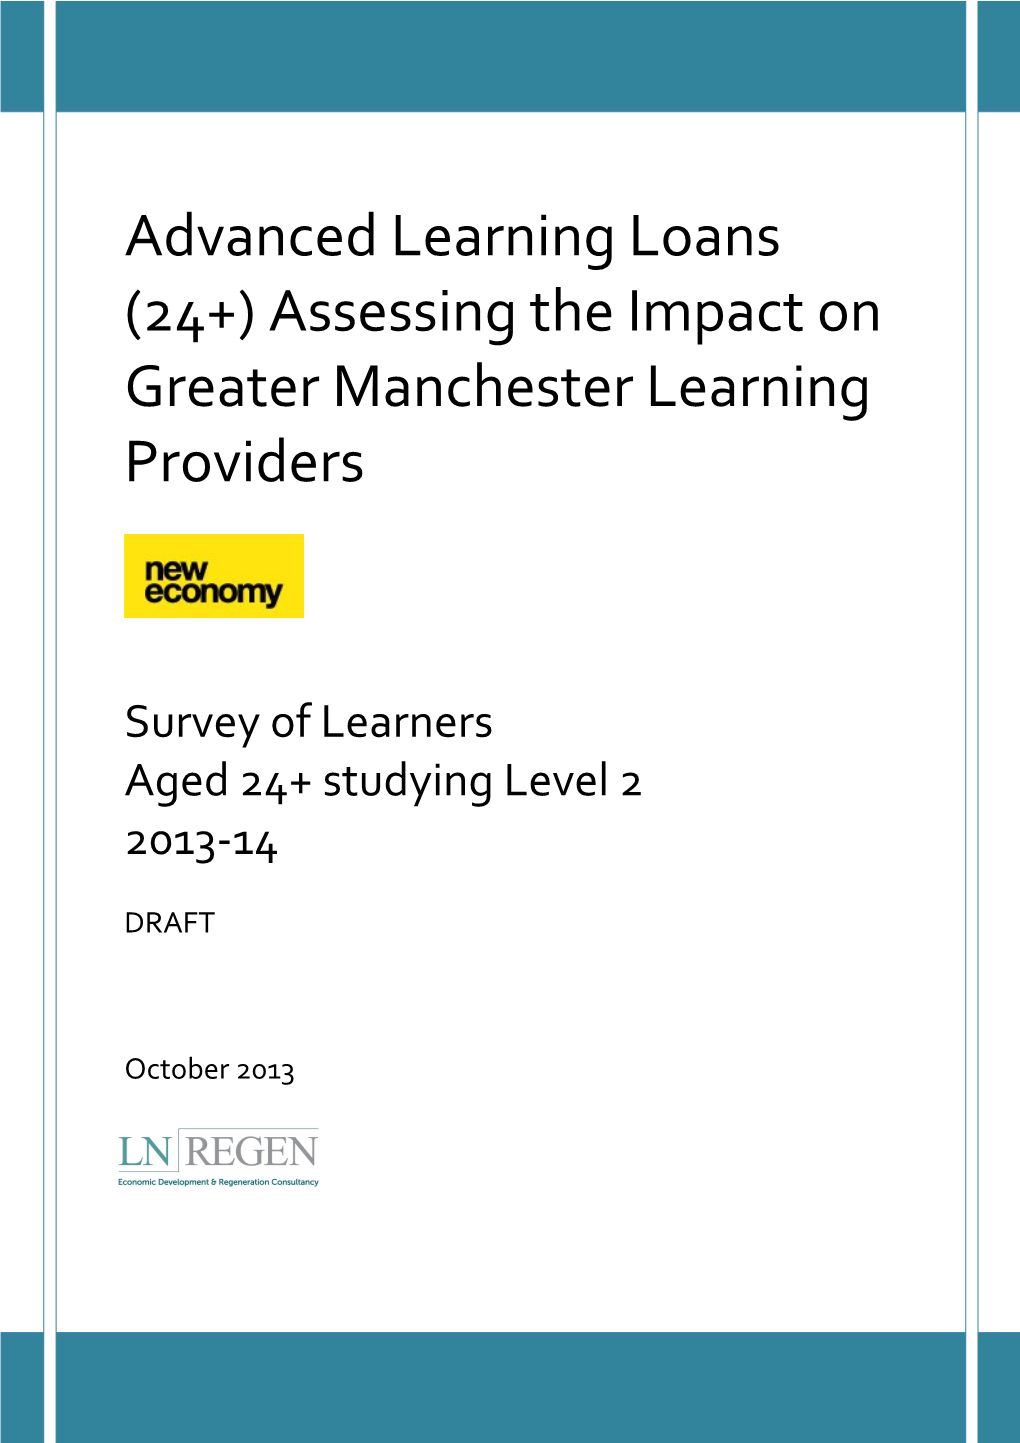 Advanced Learning Loans (24+) Assessing the Impact on Greater Manchester Learning Providers